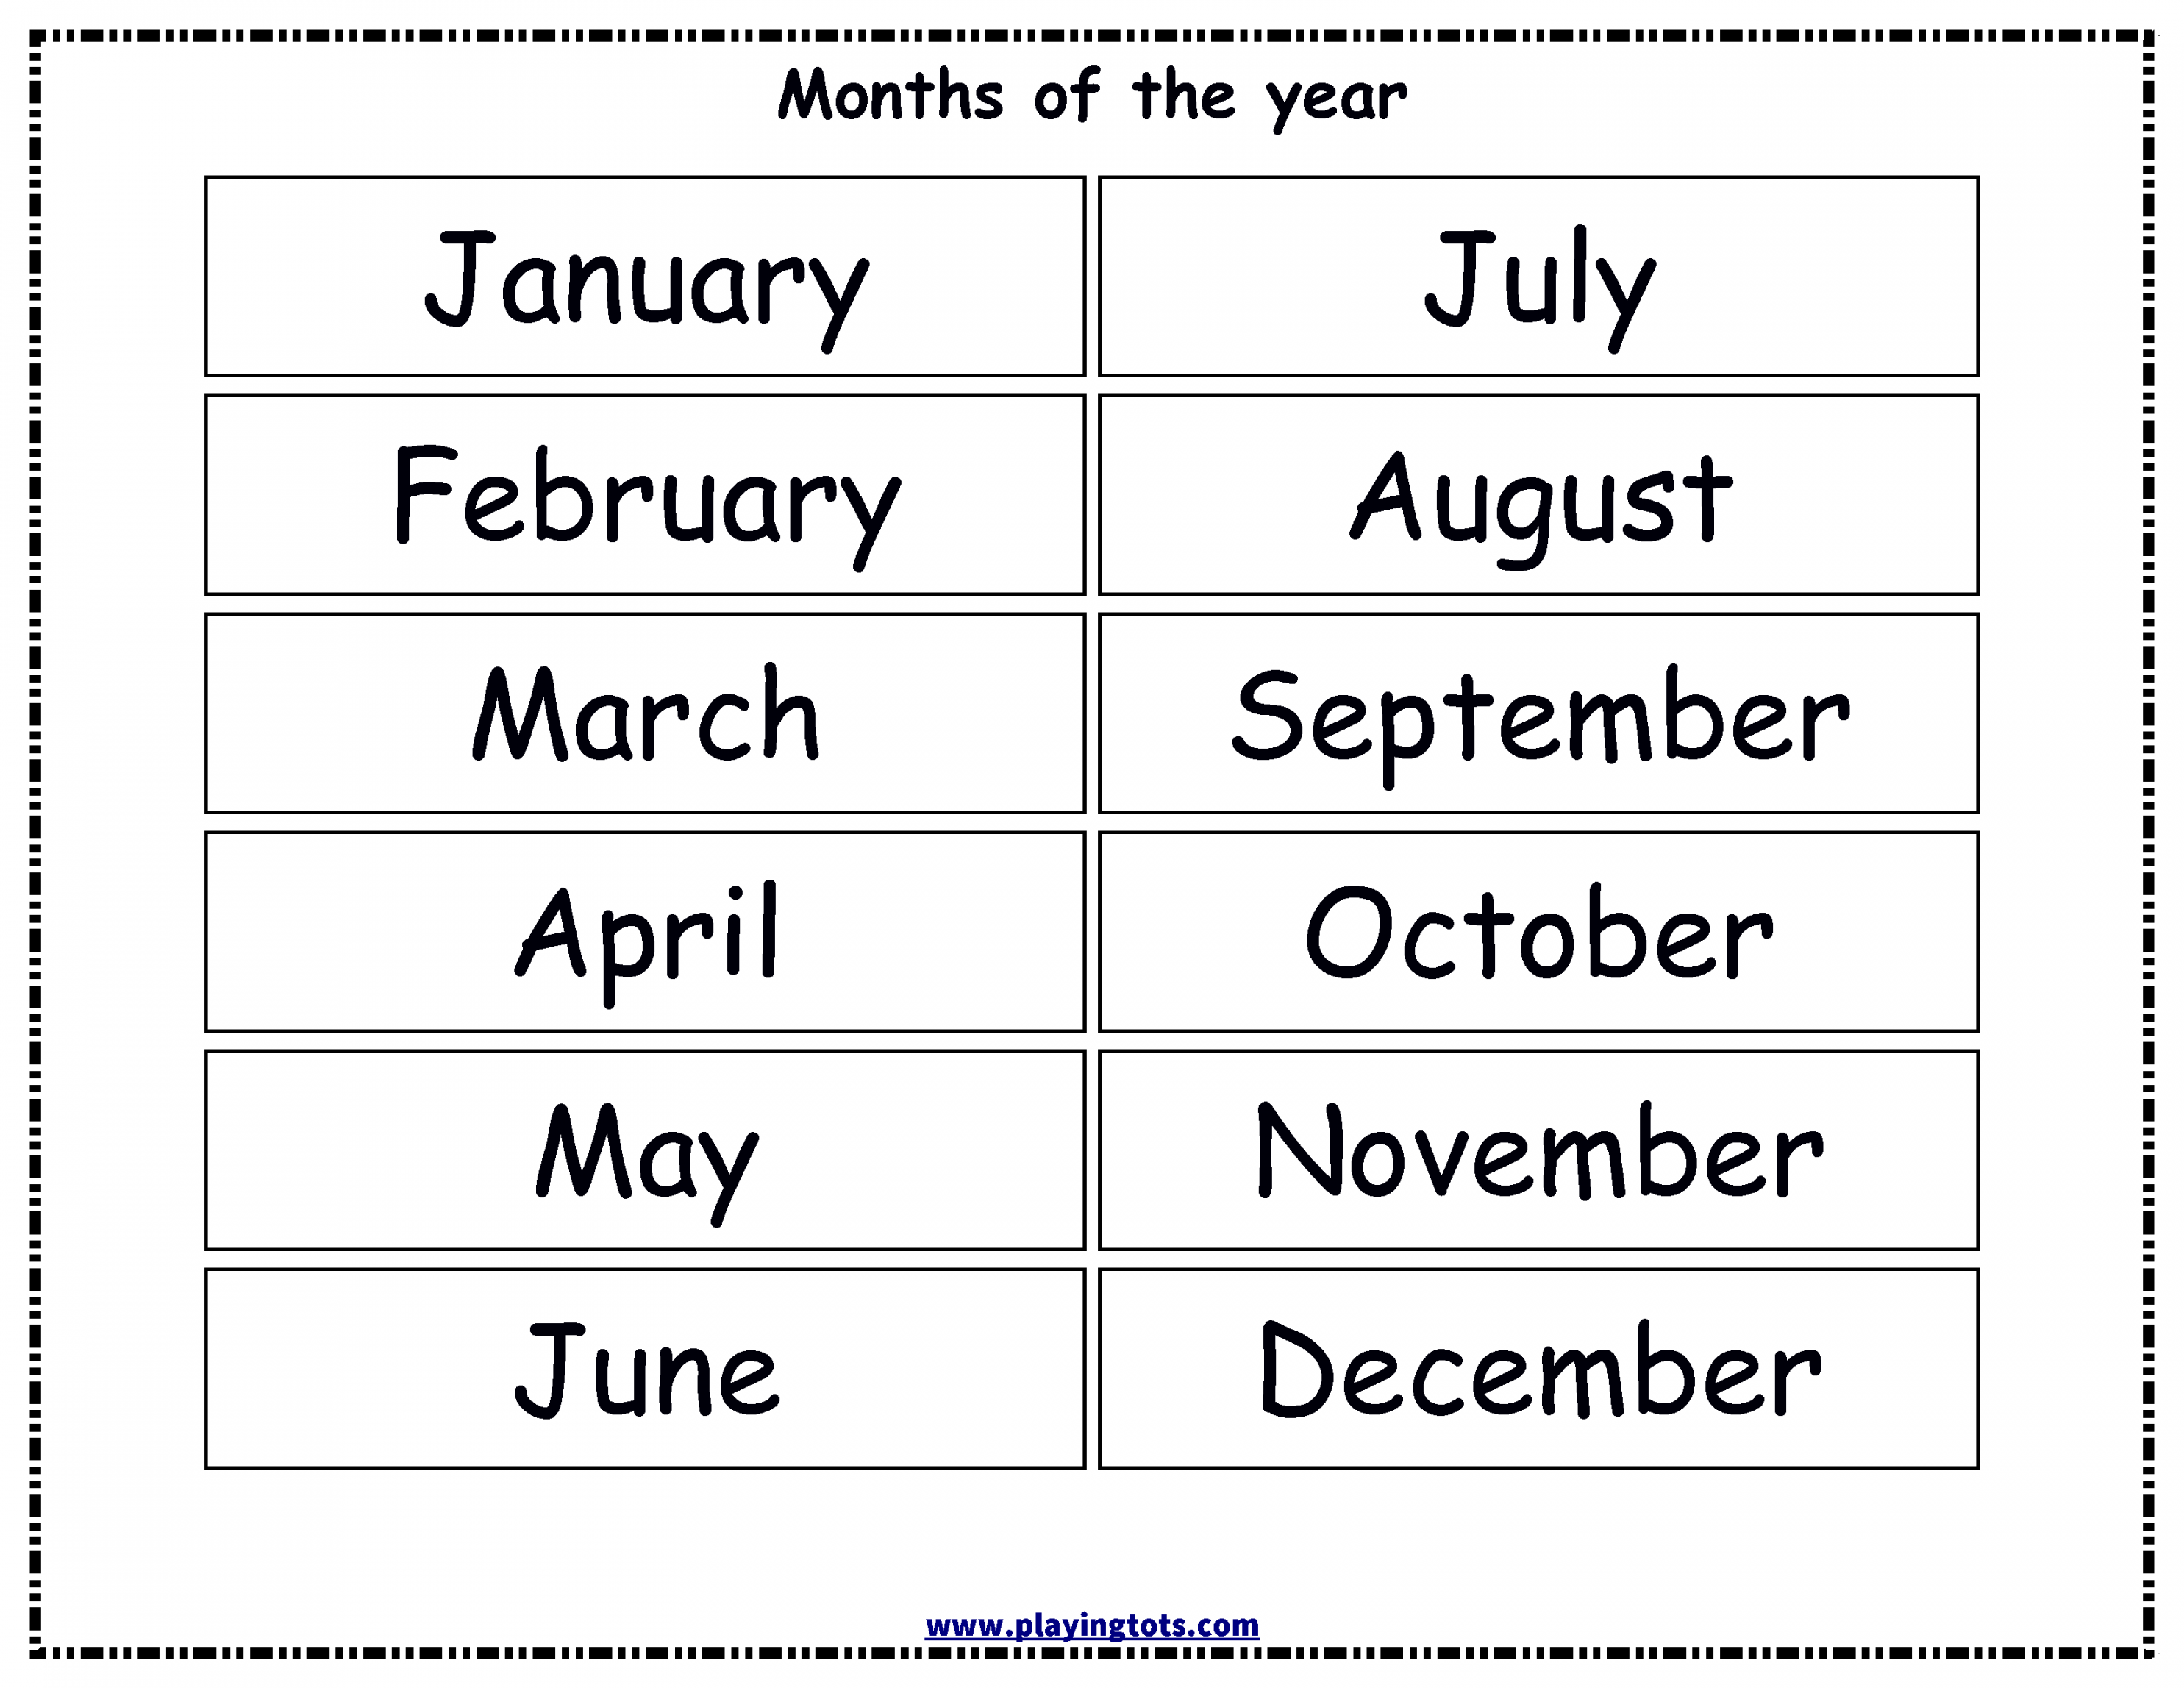 Free printable Months of the year chart  Months in a year  - FREE Printables - Free Printable Months Of The Year